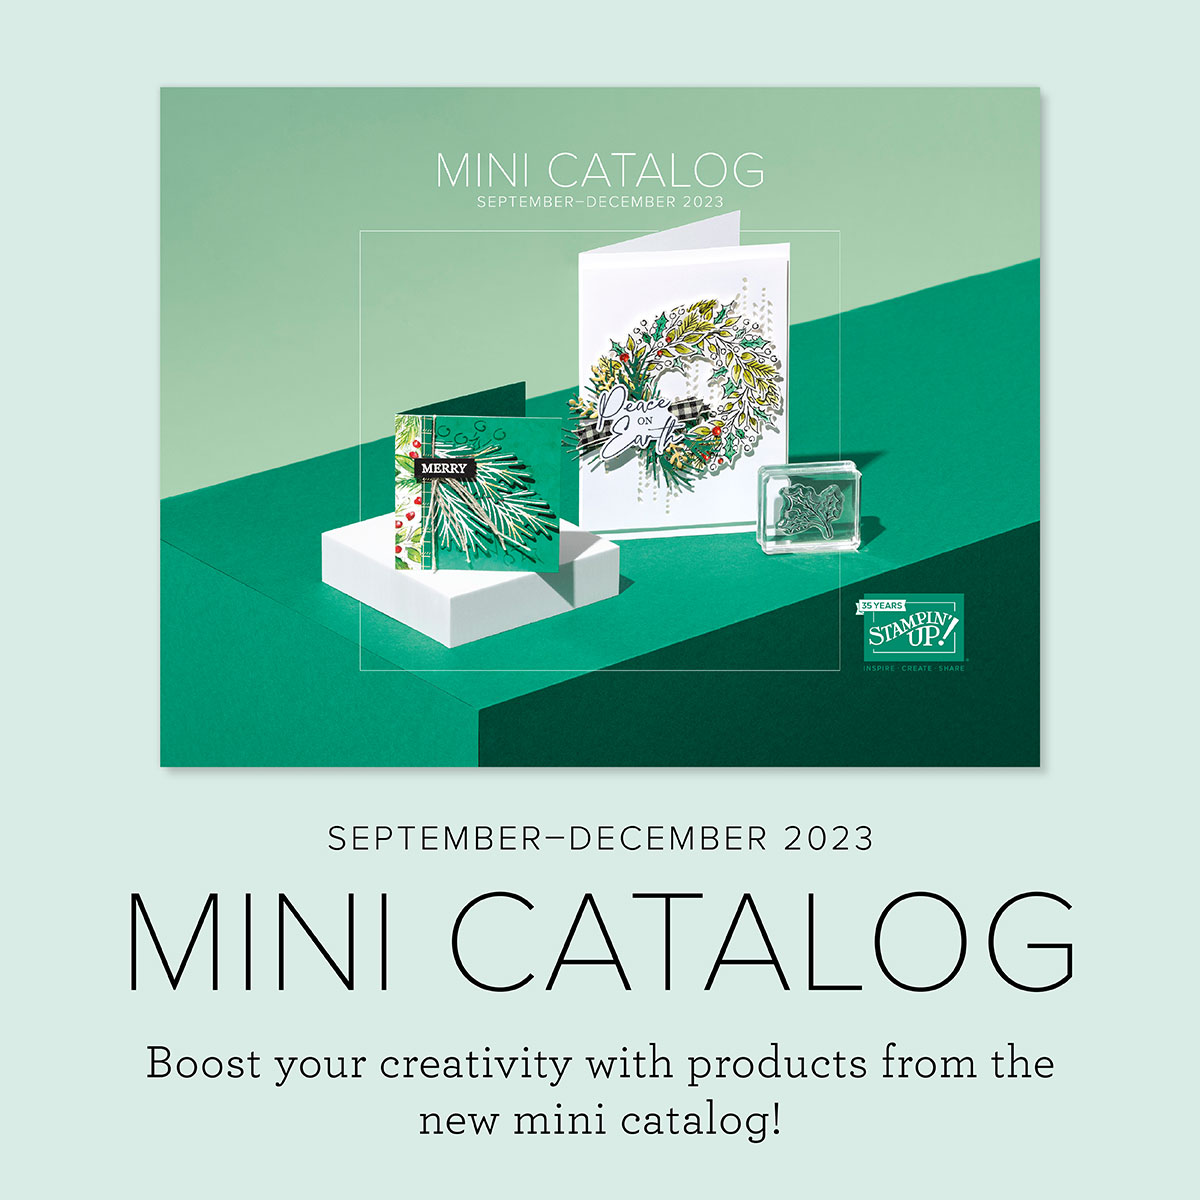 Our newest Stampin’ Up! Mini Catalog products are now available!